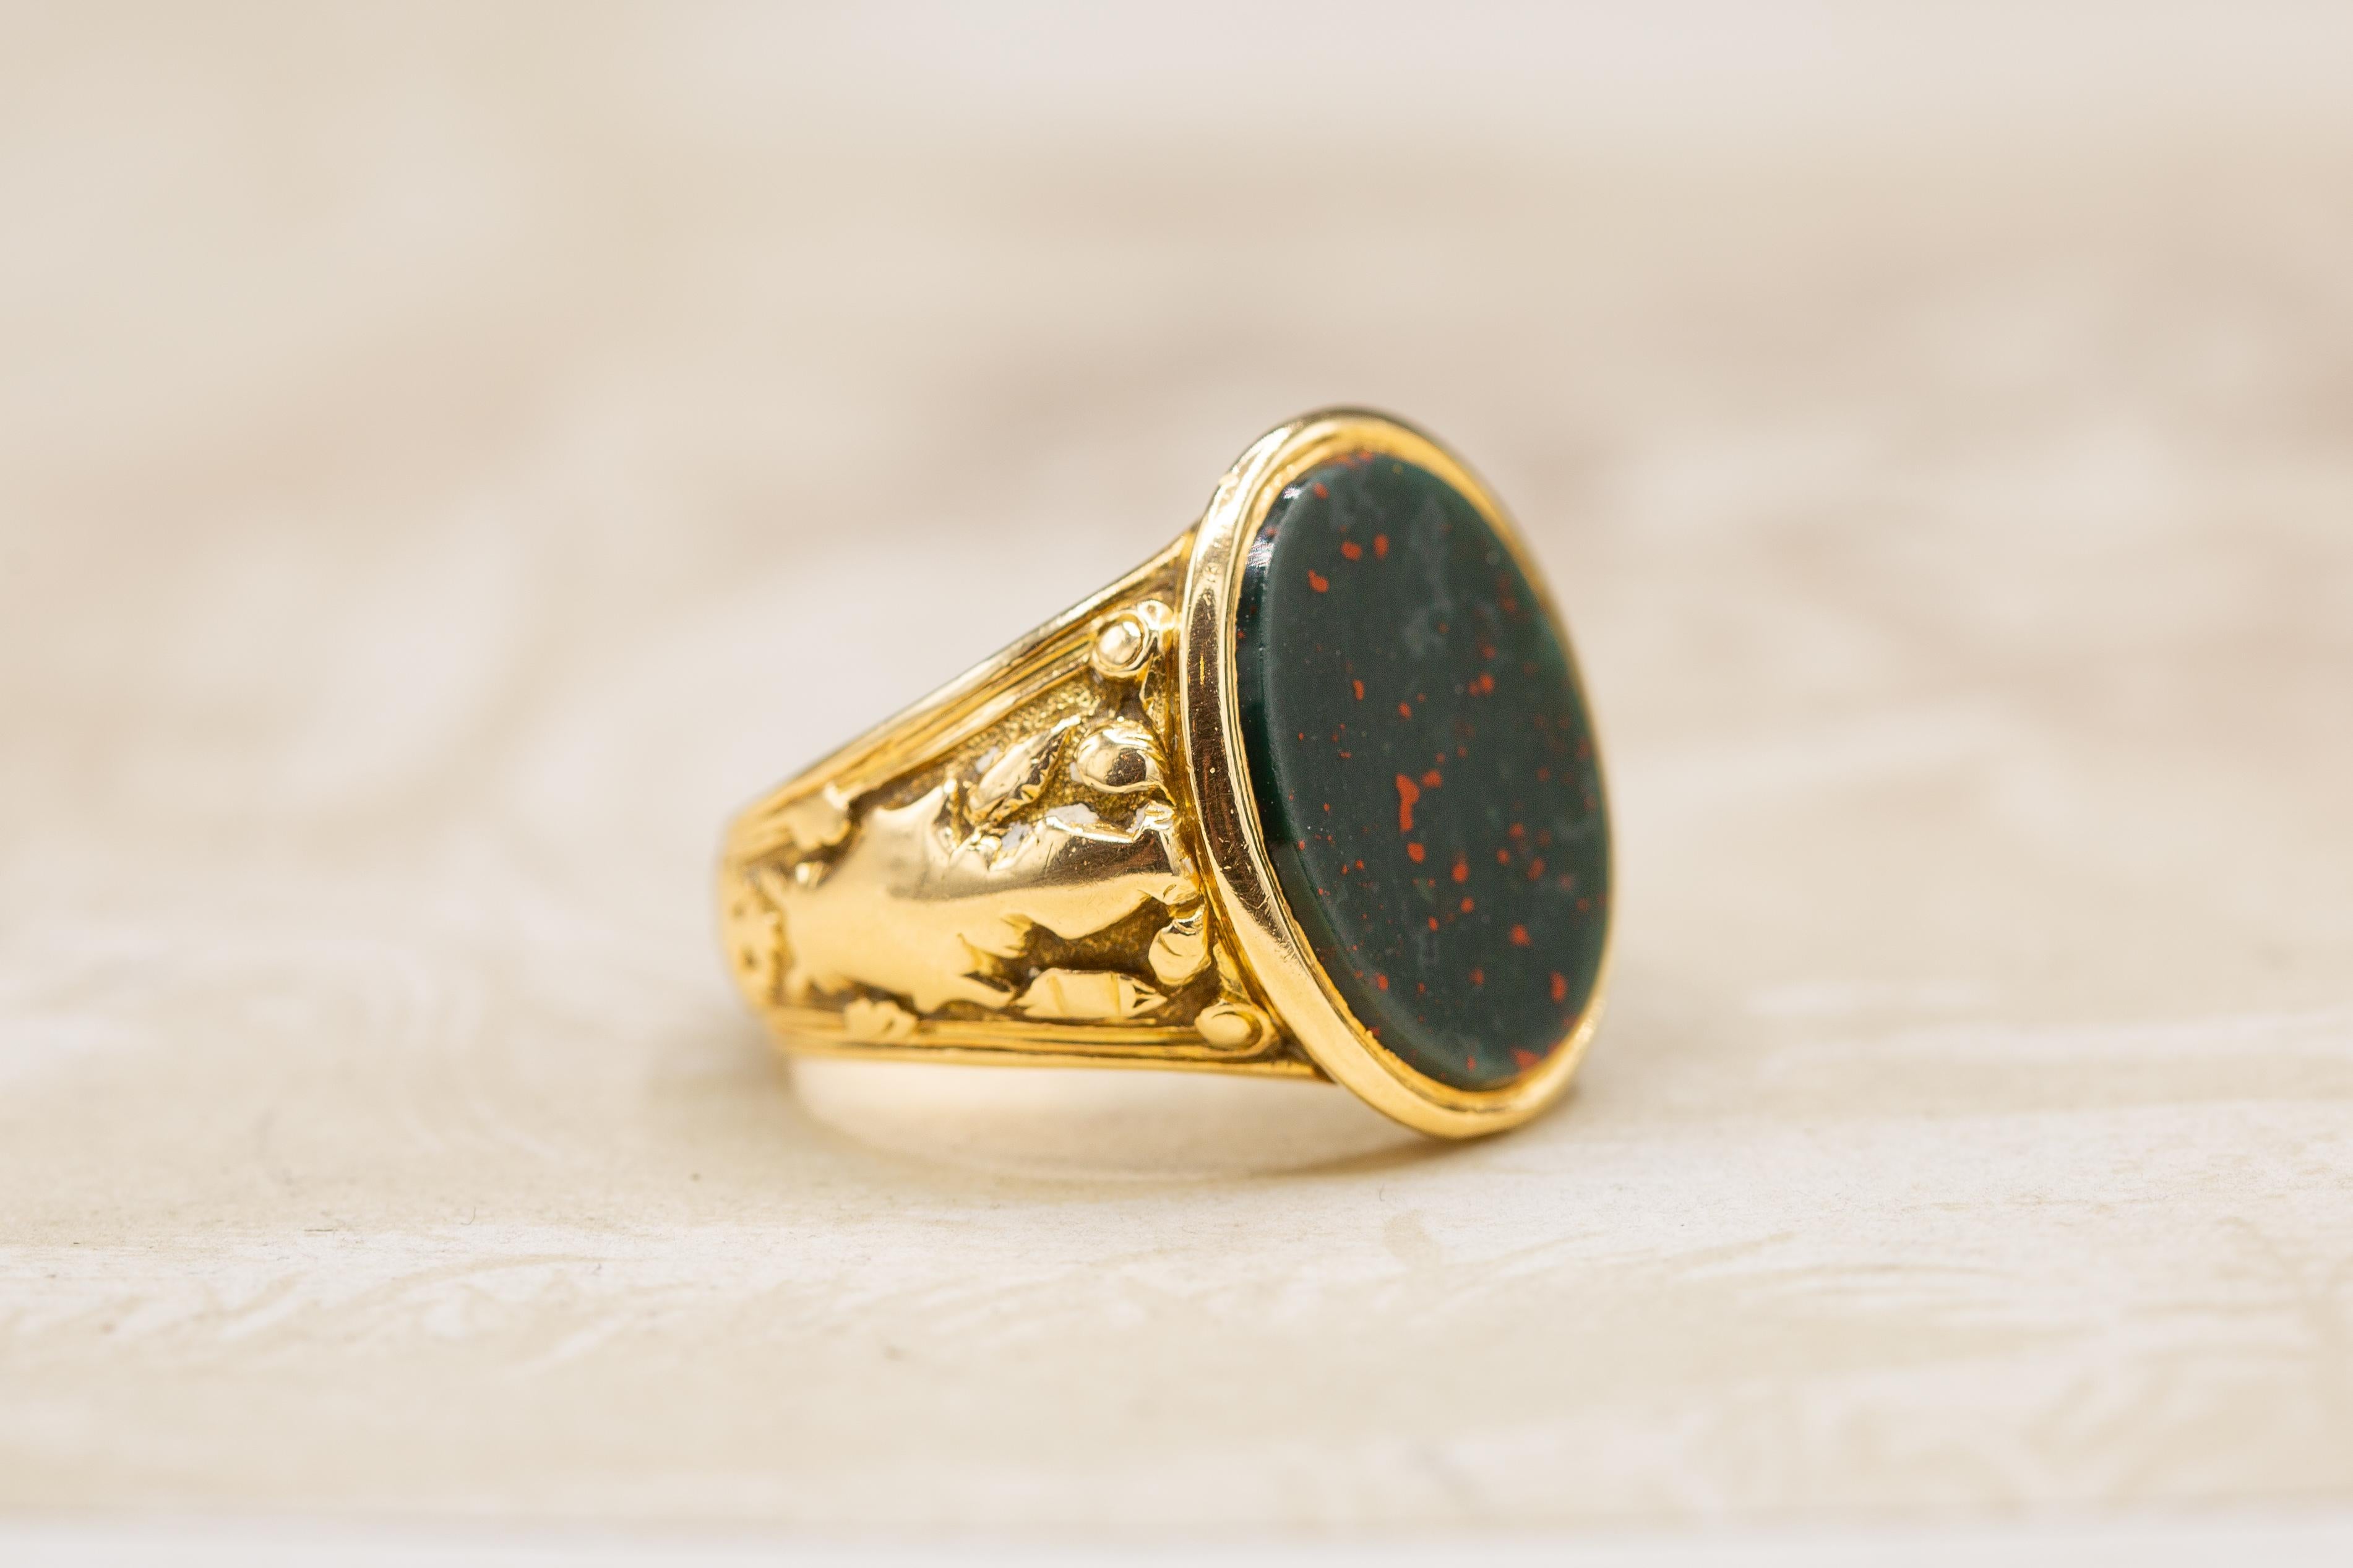 Antique Victorian Heavy 18K Gold Bloodstone Signet Ring Mens Coat of Arms c.1890 For Sale 3